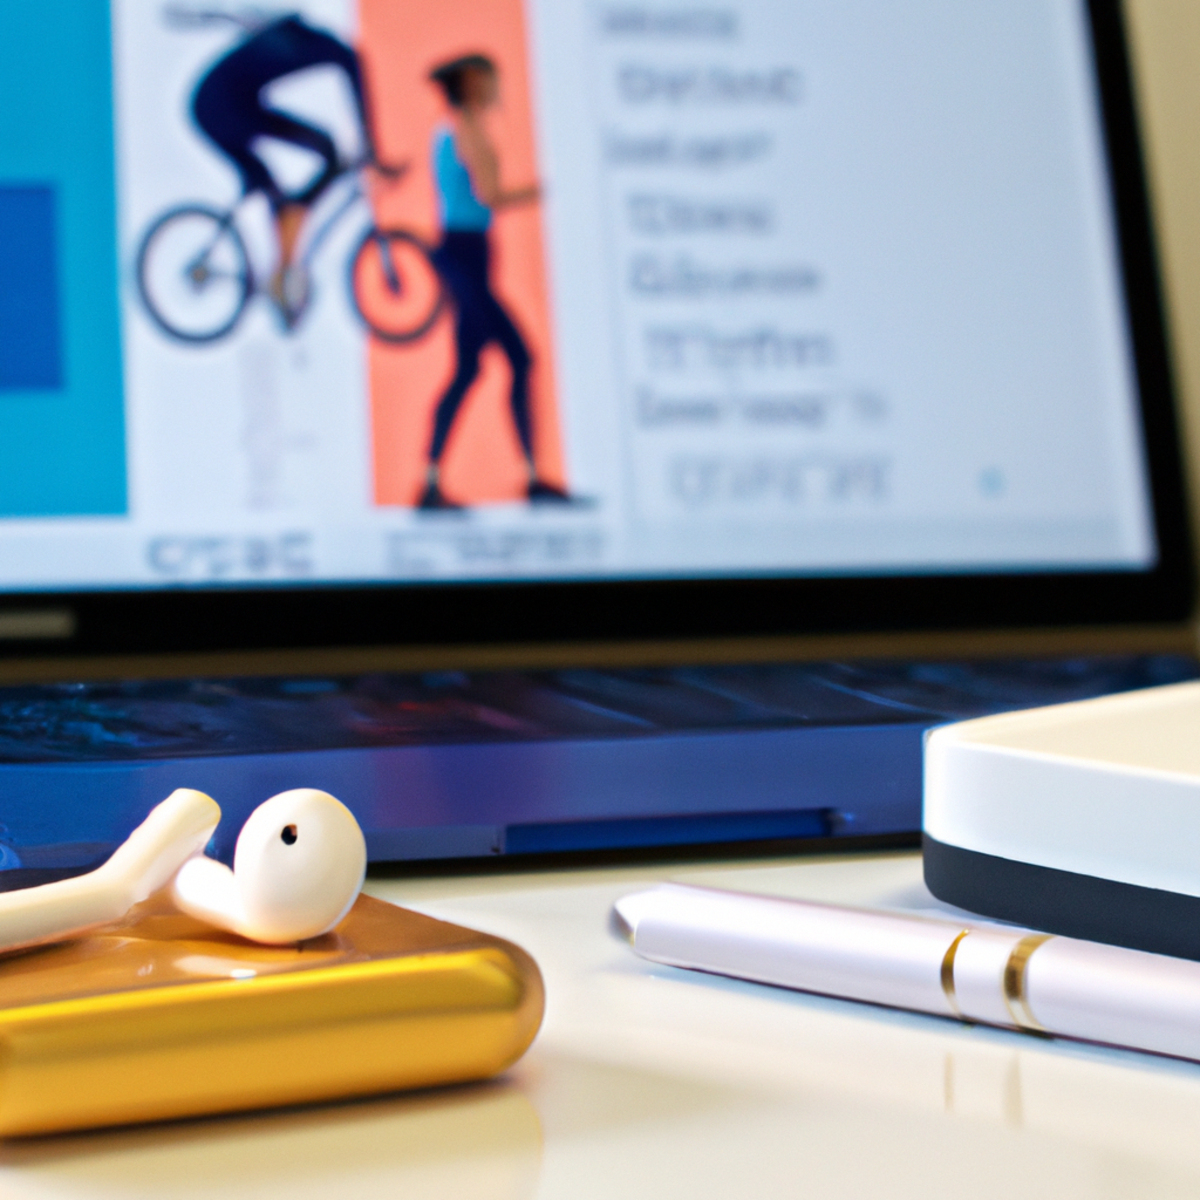 Cluttered desk in modern office with fitness app on laptop, wireless earphones, water bottle, yoga mat, and dumbbells. Encourages exercise for busy professionals.